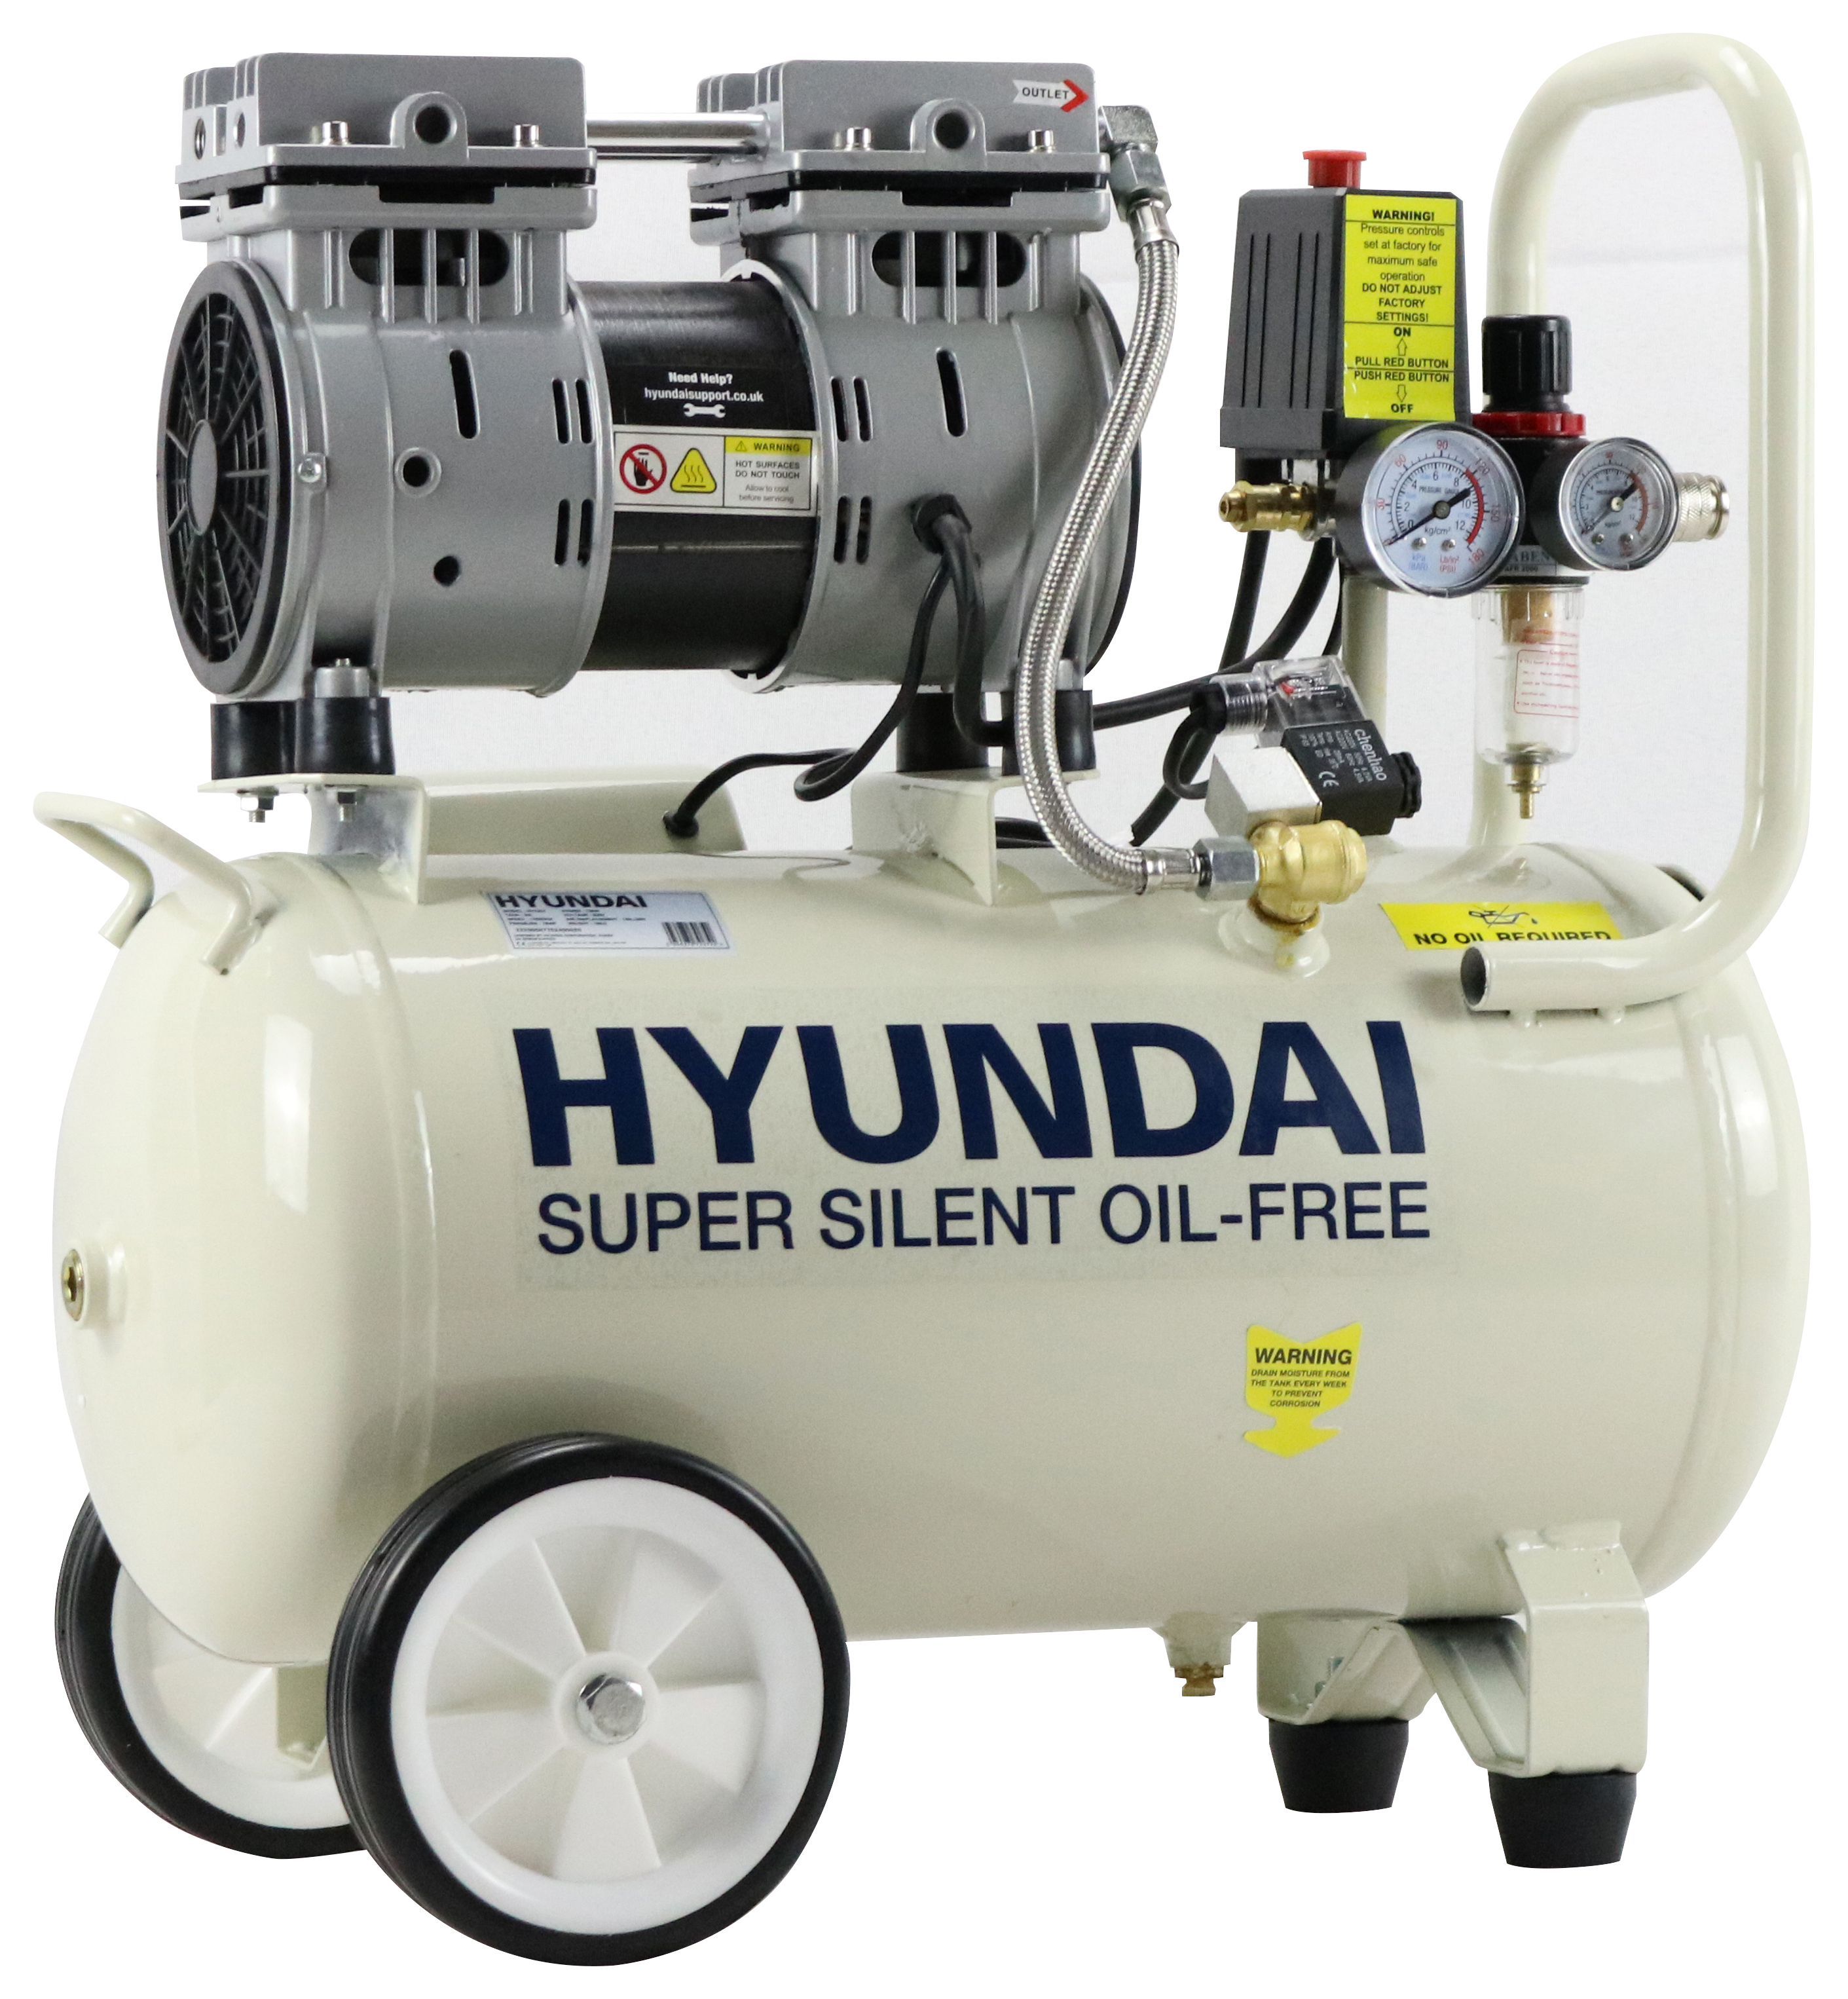 Image of Hyundai HY7524 24L OIL-FREE Low Noise Air Compressor - 750W